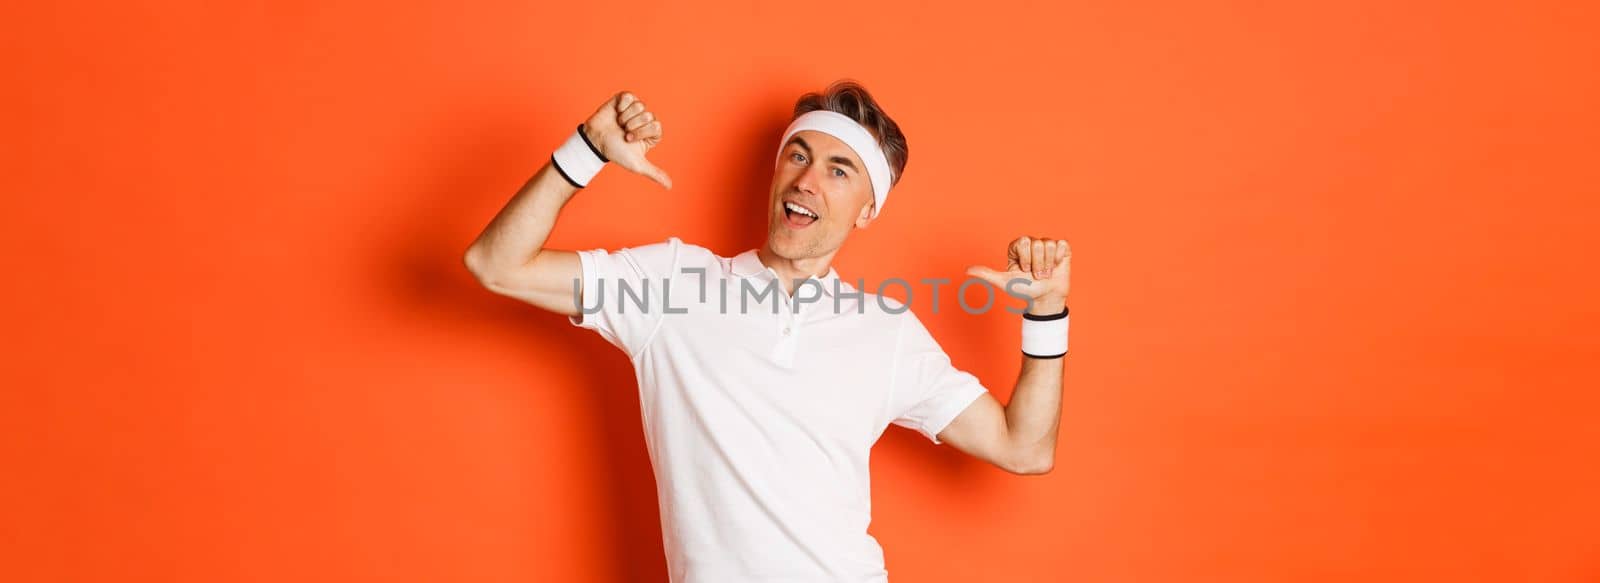 Concept of sport, fitness and lifestyle. Image of confident middle-aged man pointing at himself proudly, wearing clothes for workout, standing over orange background by Benzoix